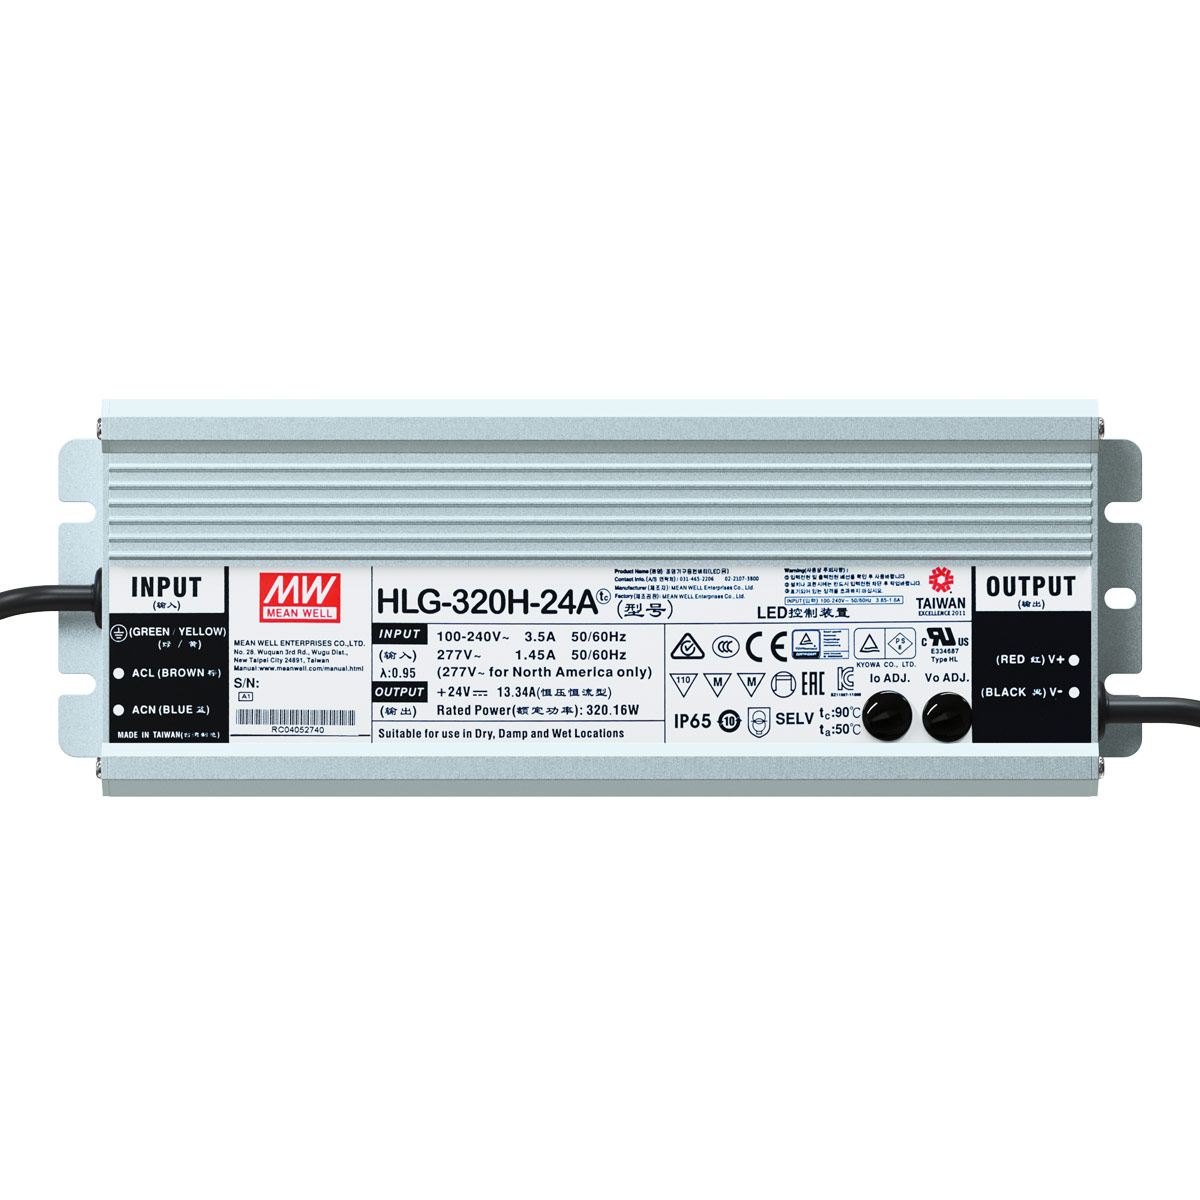 View 320w Meanwell LED Driver IP65 Rated 24v DC information